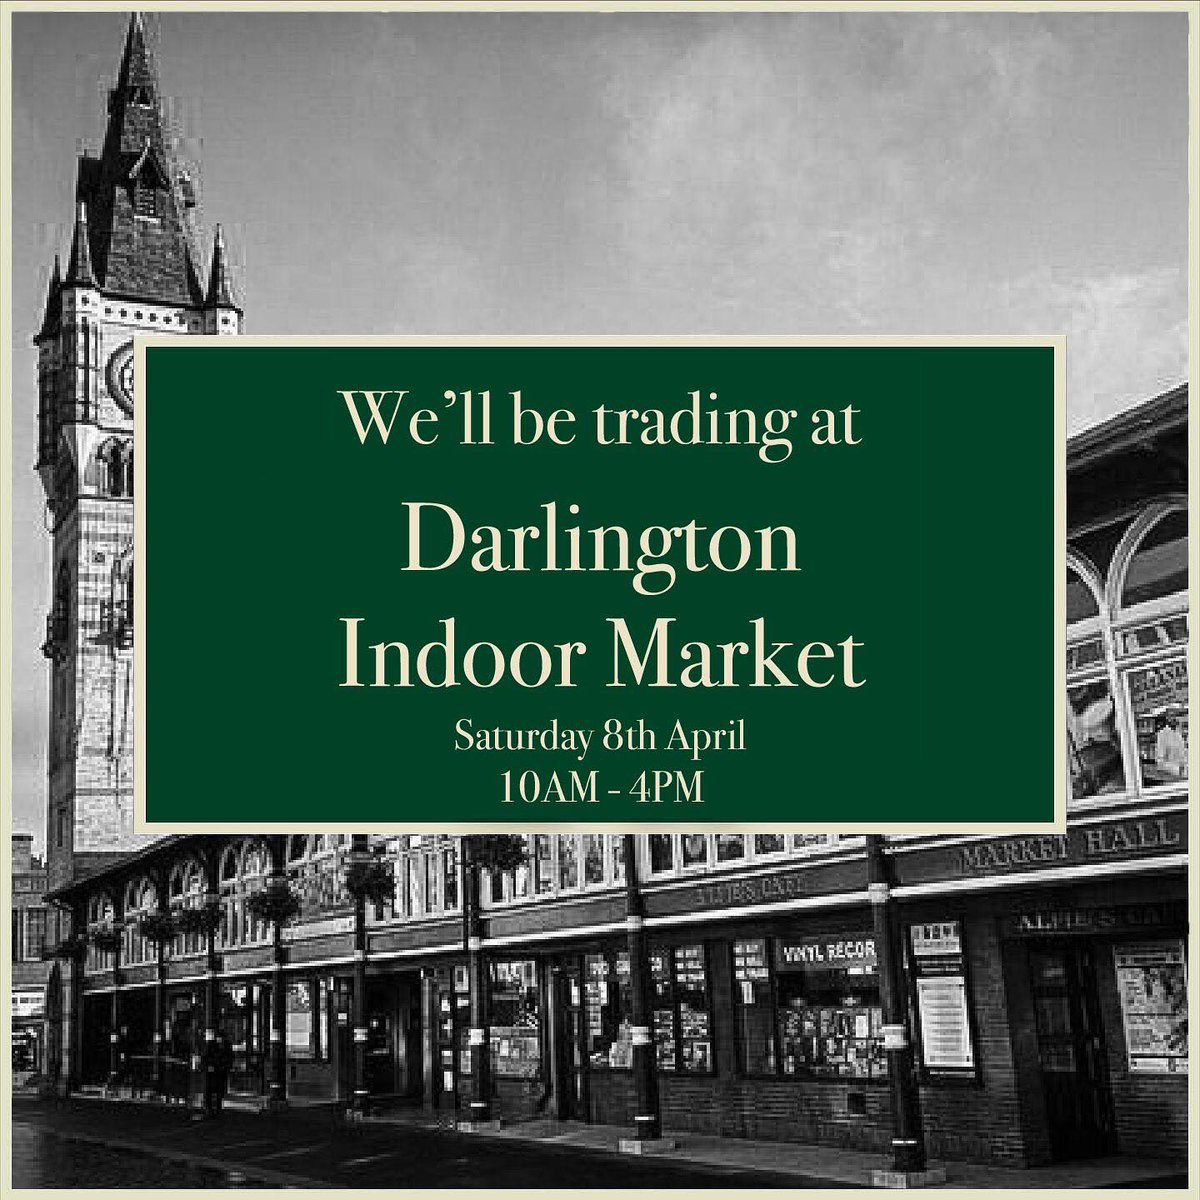 Find us this Saturday @ #Darlingtonmarket for the first @marketsmatter North East #youngtradersmarket event this year 😊

#northeastevents #markettrader #youngtraders #shopvintage #shopsustainable #shoppreloved #nefollowers #northeastcreatives